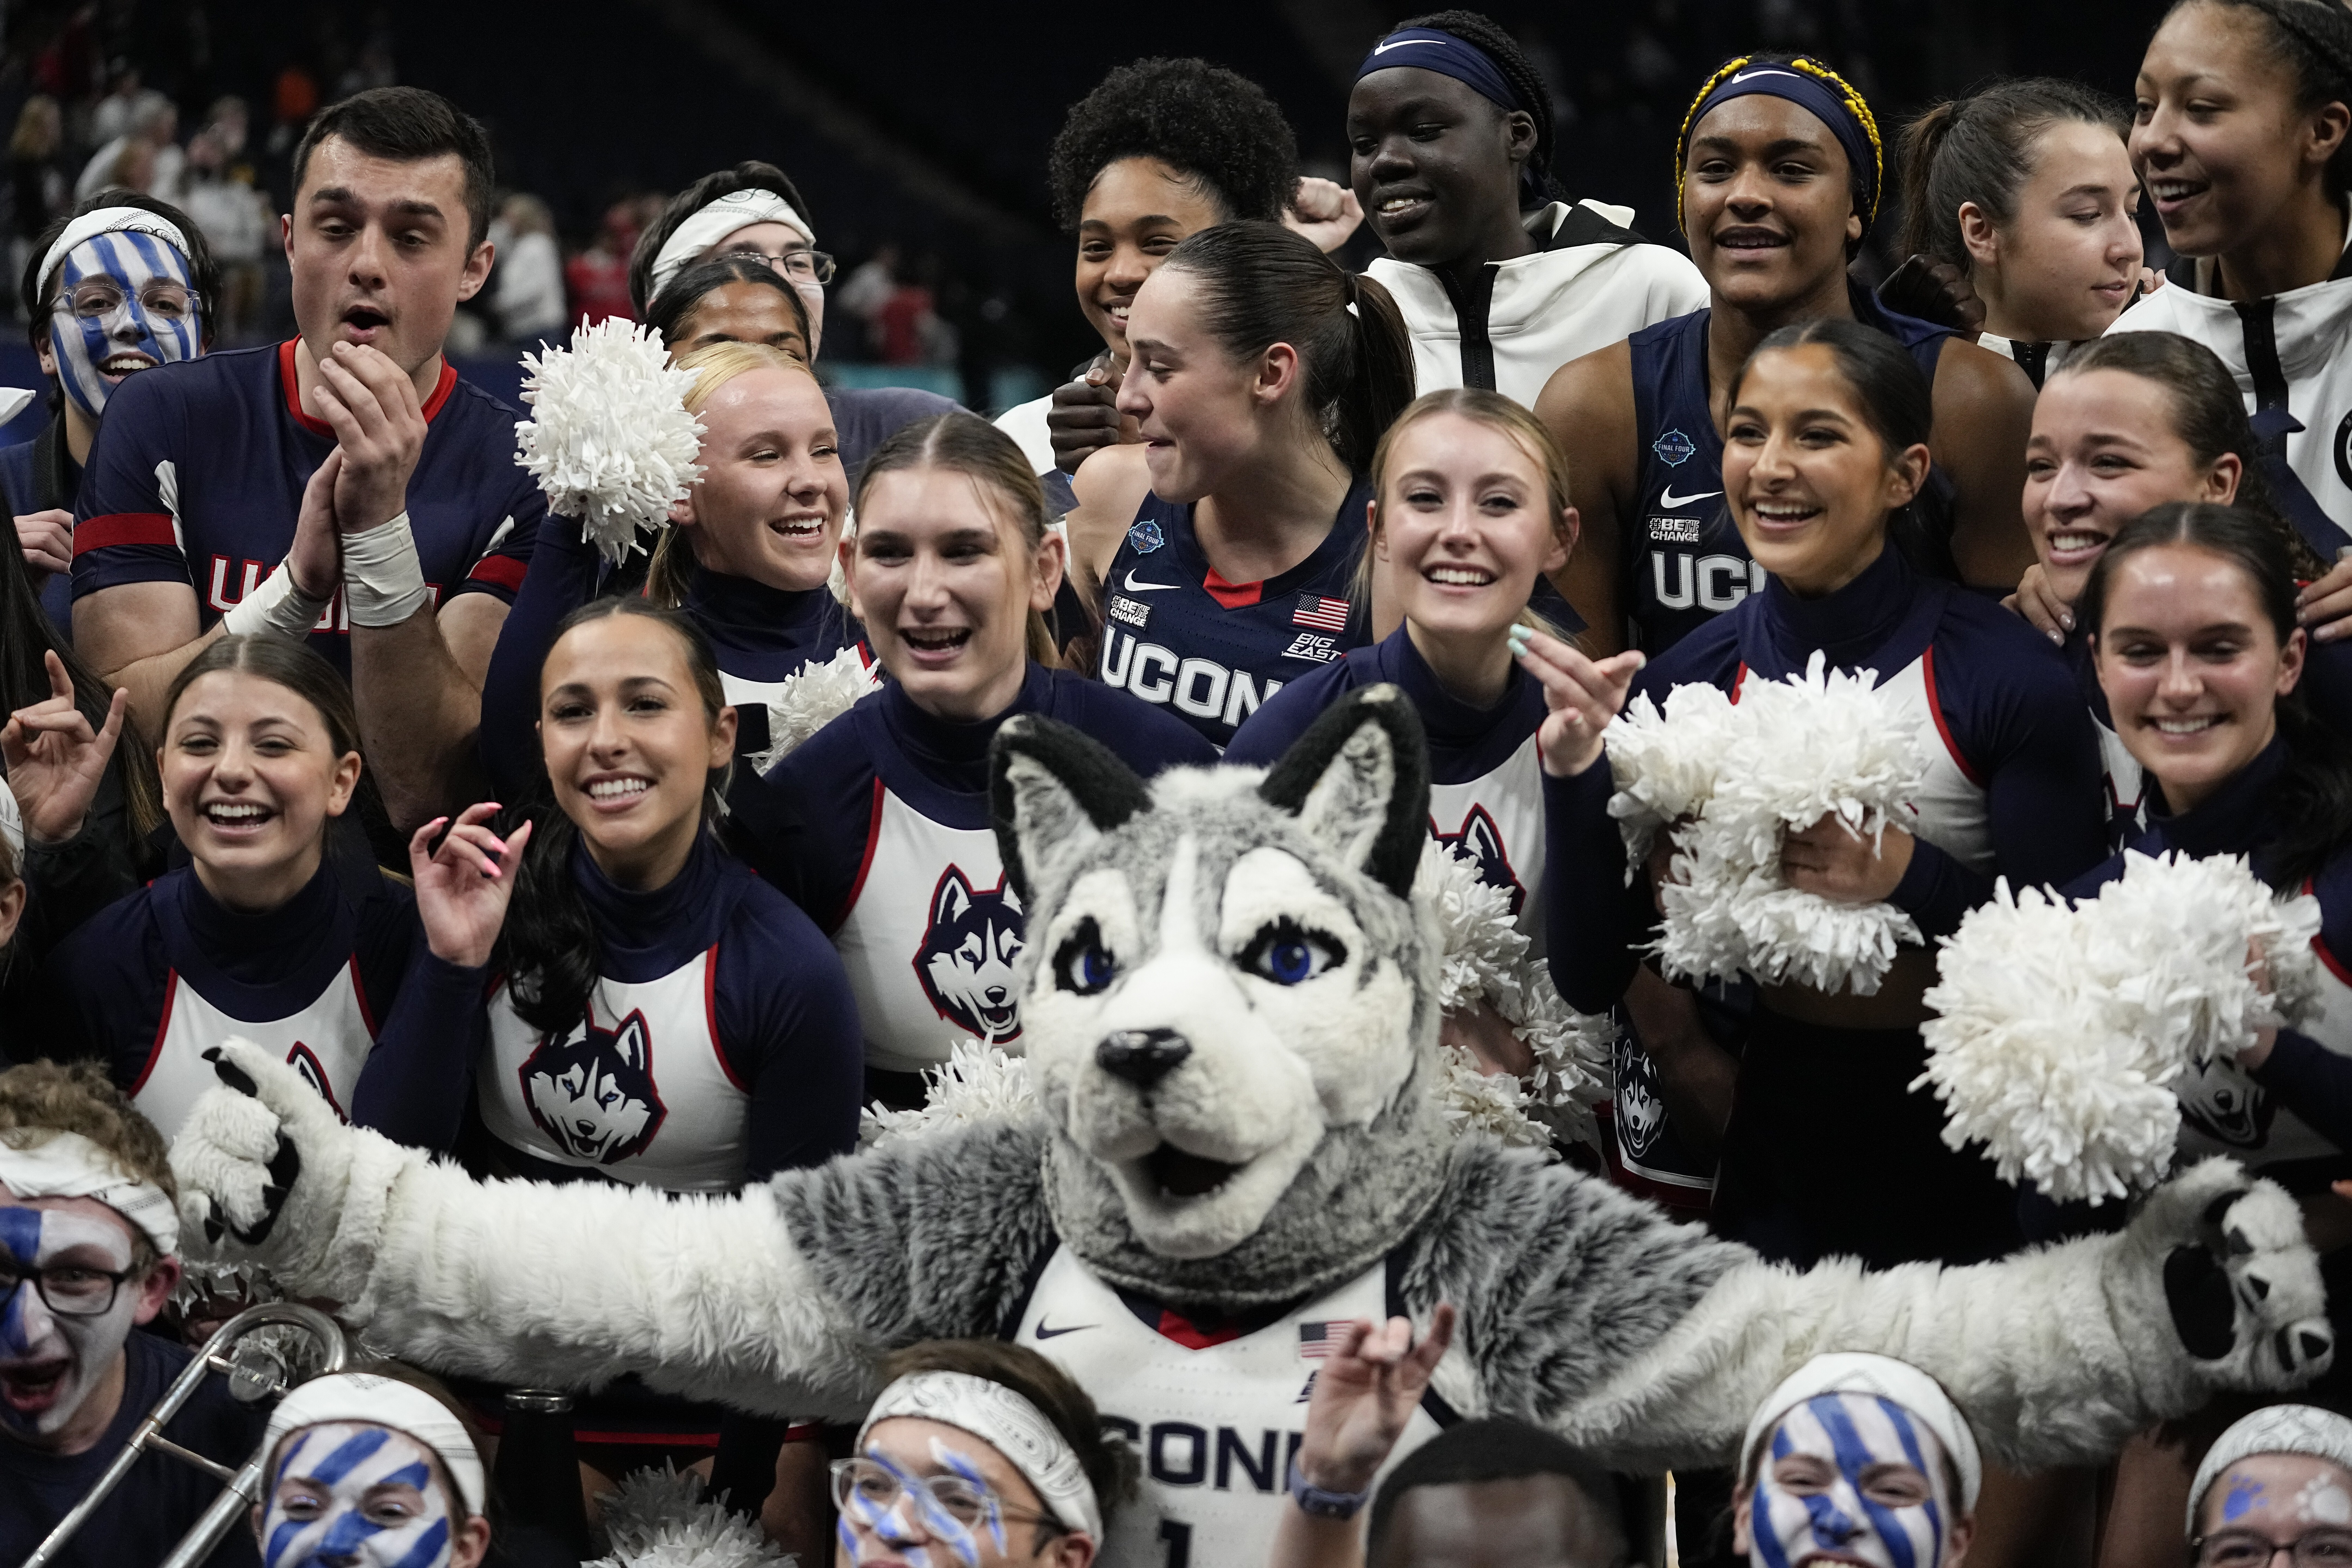 How to watch NCAA Womens Championship UConn vs